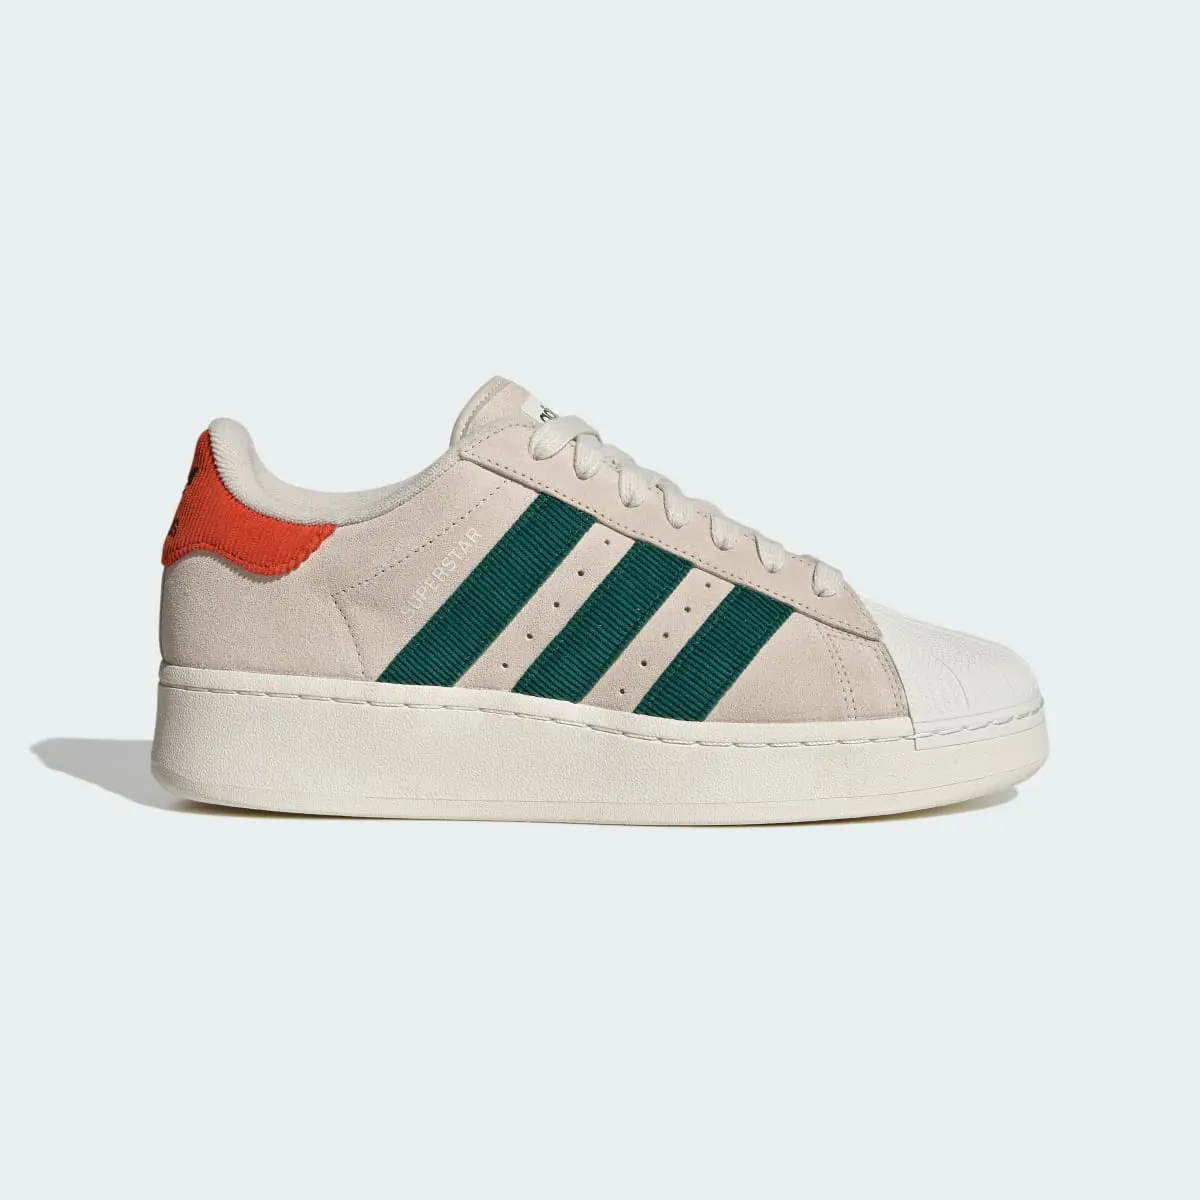 Adidas Superstar XLG Shoes. 2